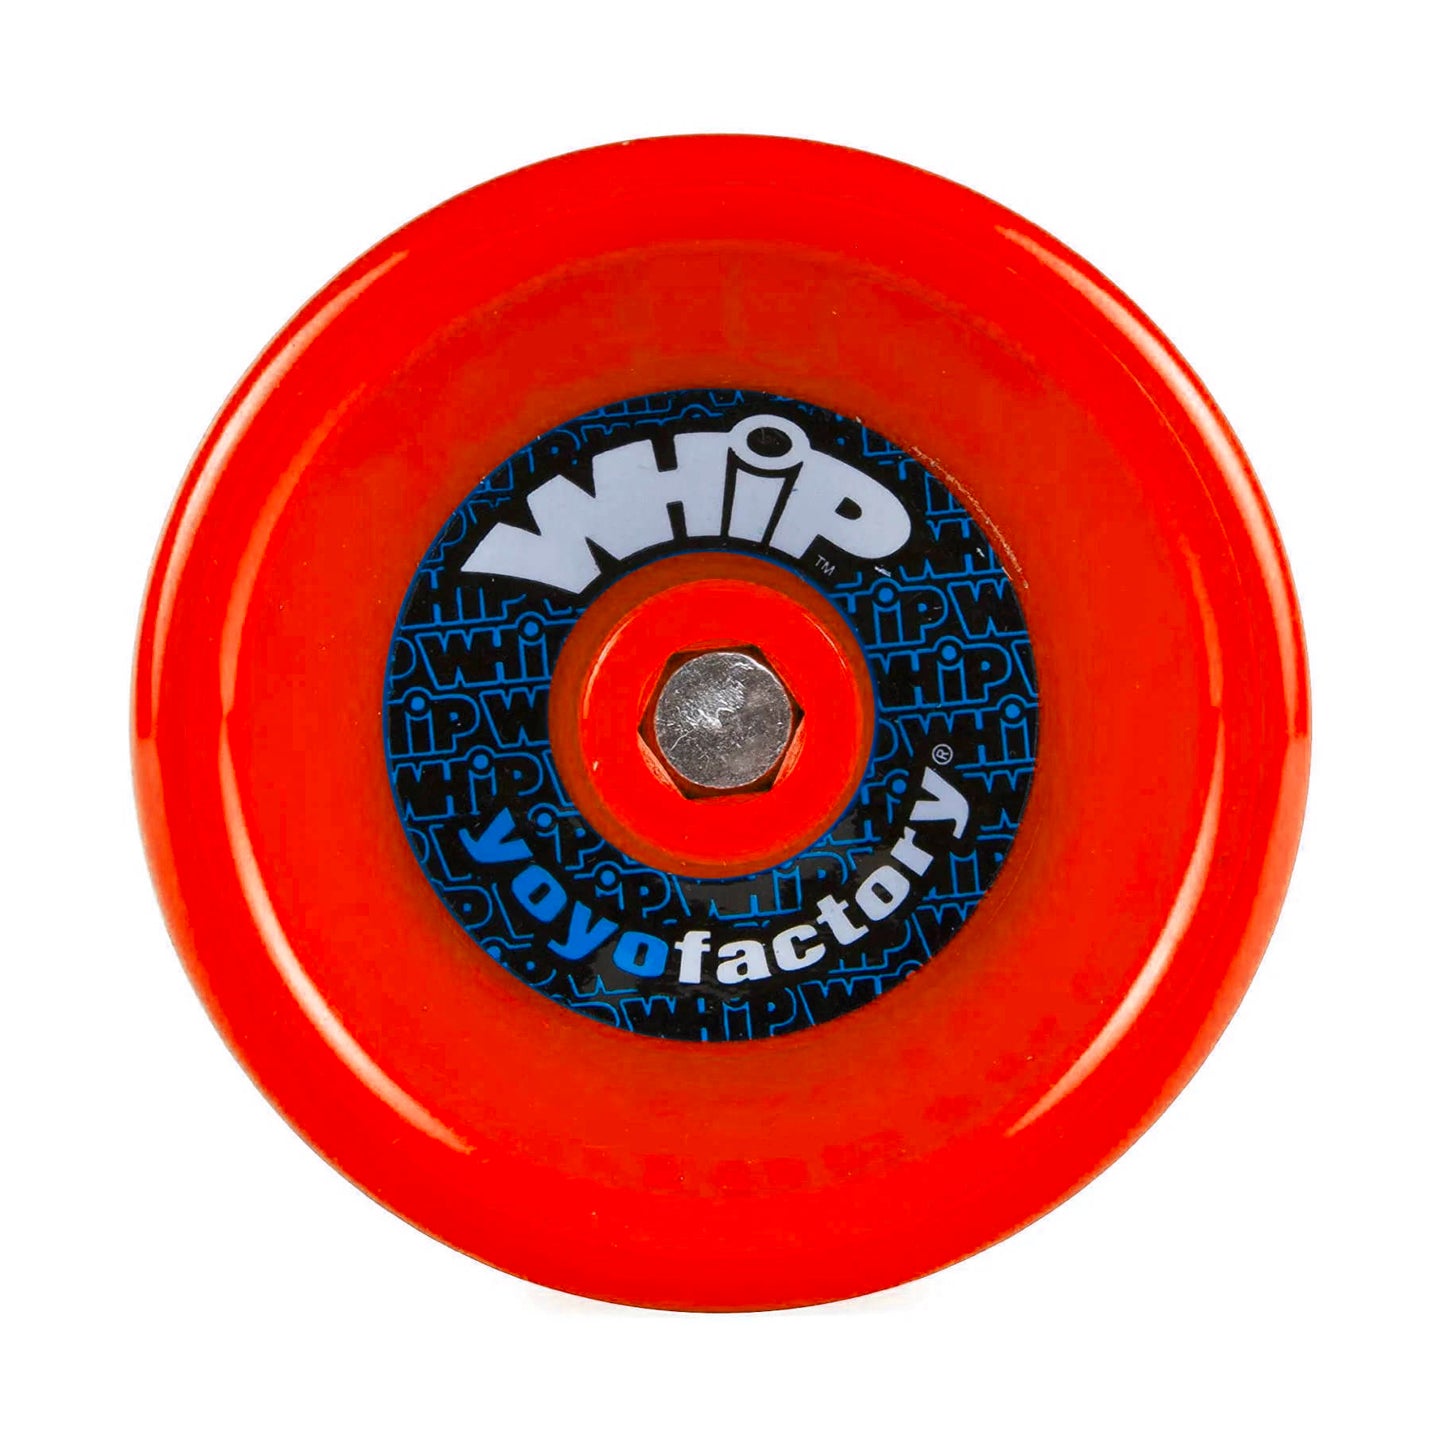 Whip YoYo Red side view